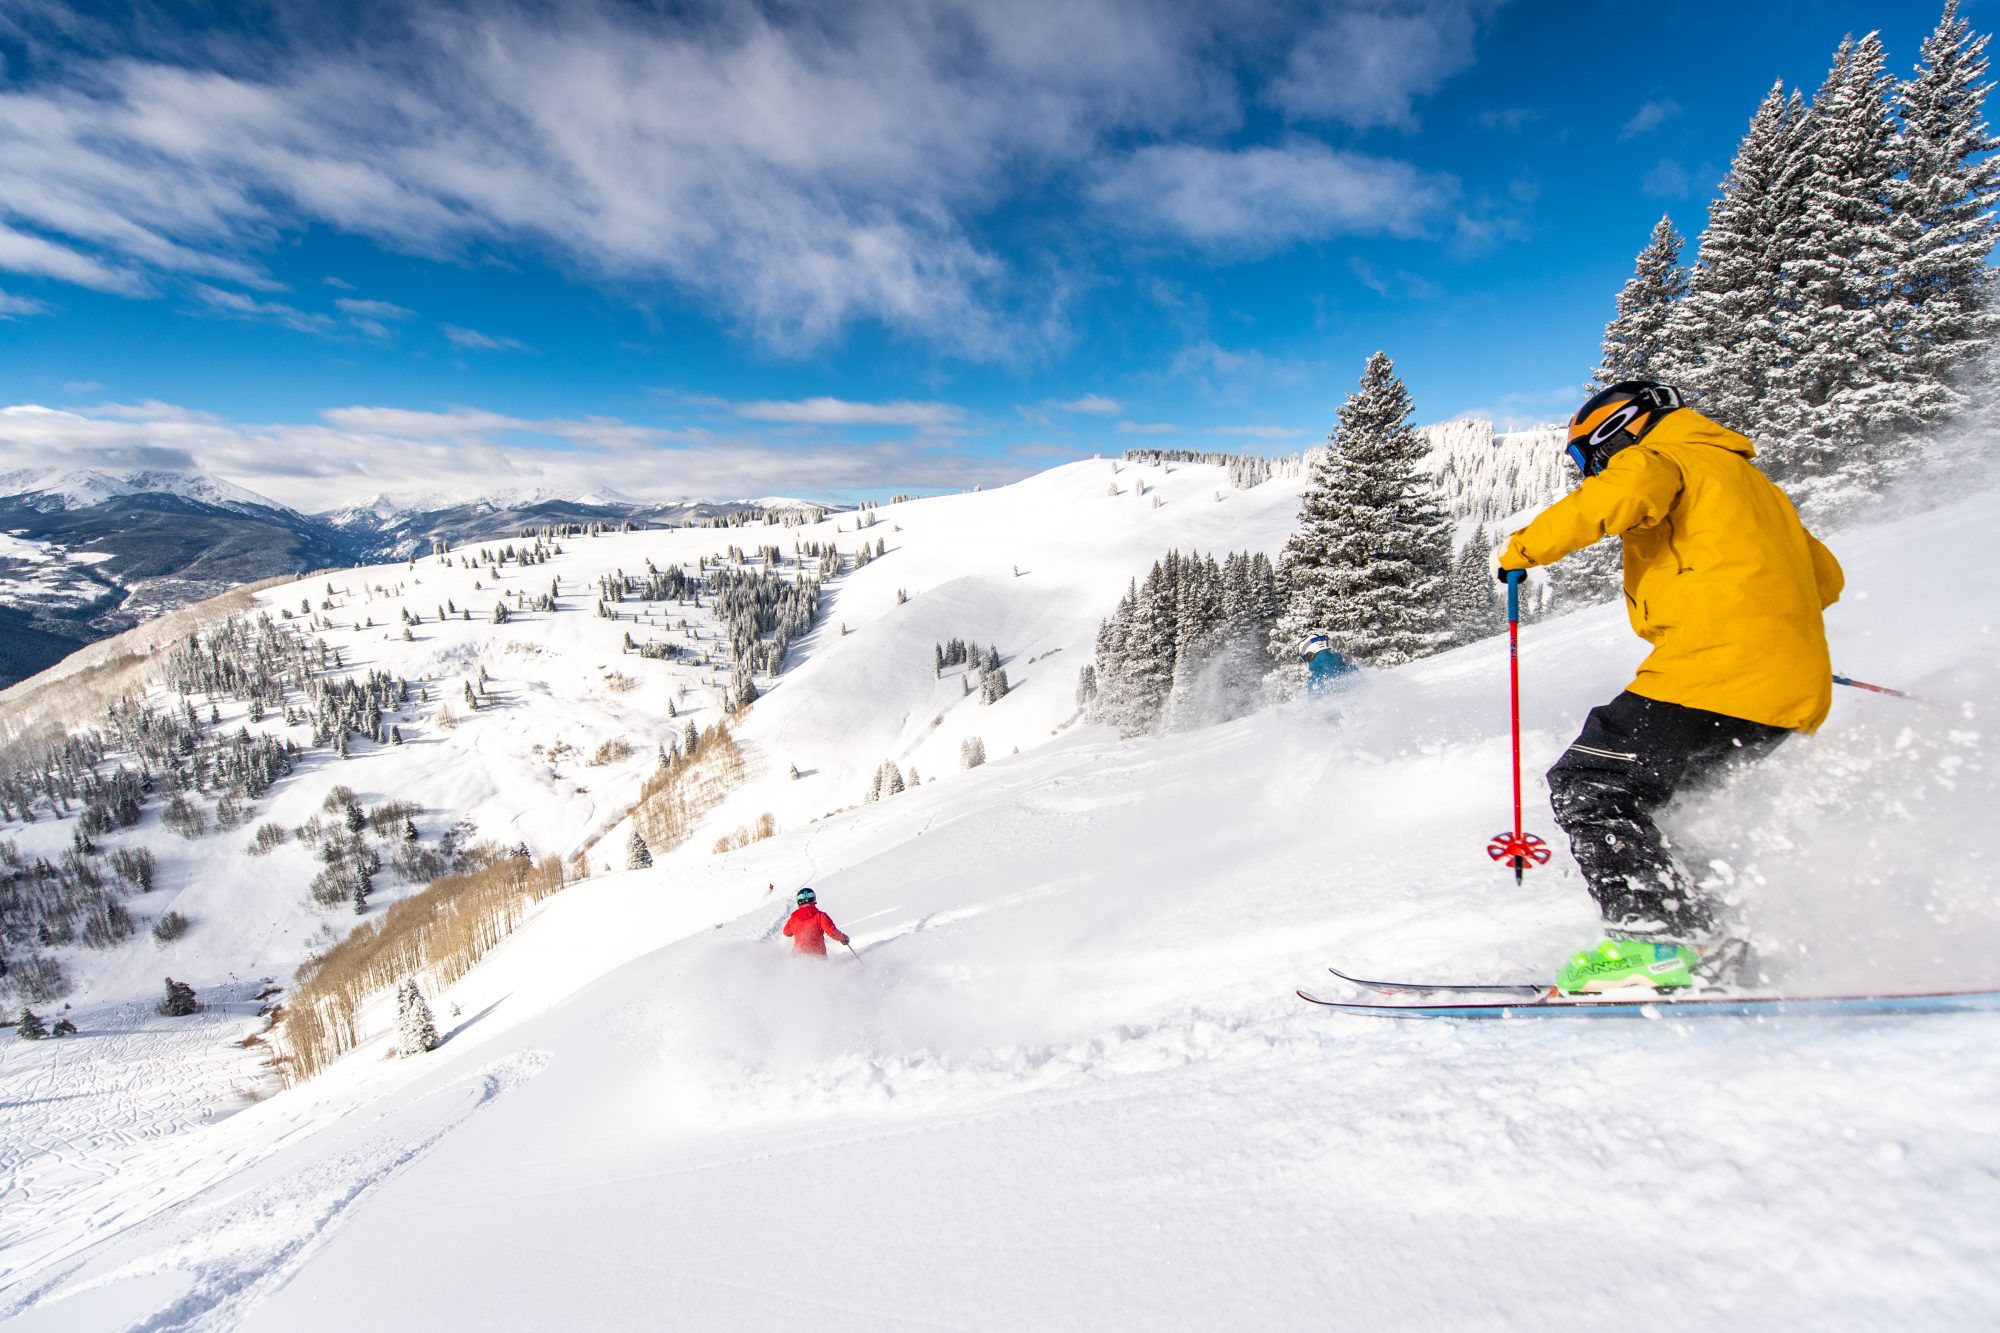 Tom Cohen Photo. Vail Resorts Commits to $175 Million to $180 Million in Capital Investments to Reimagine the Guest Experience for the 2019-20 Season.